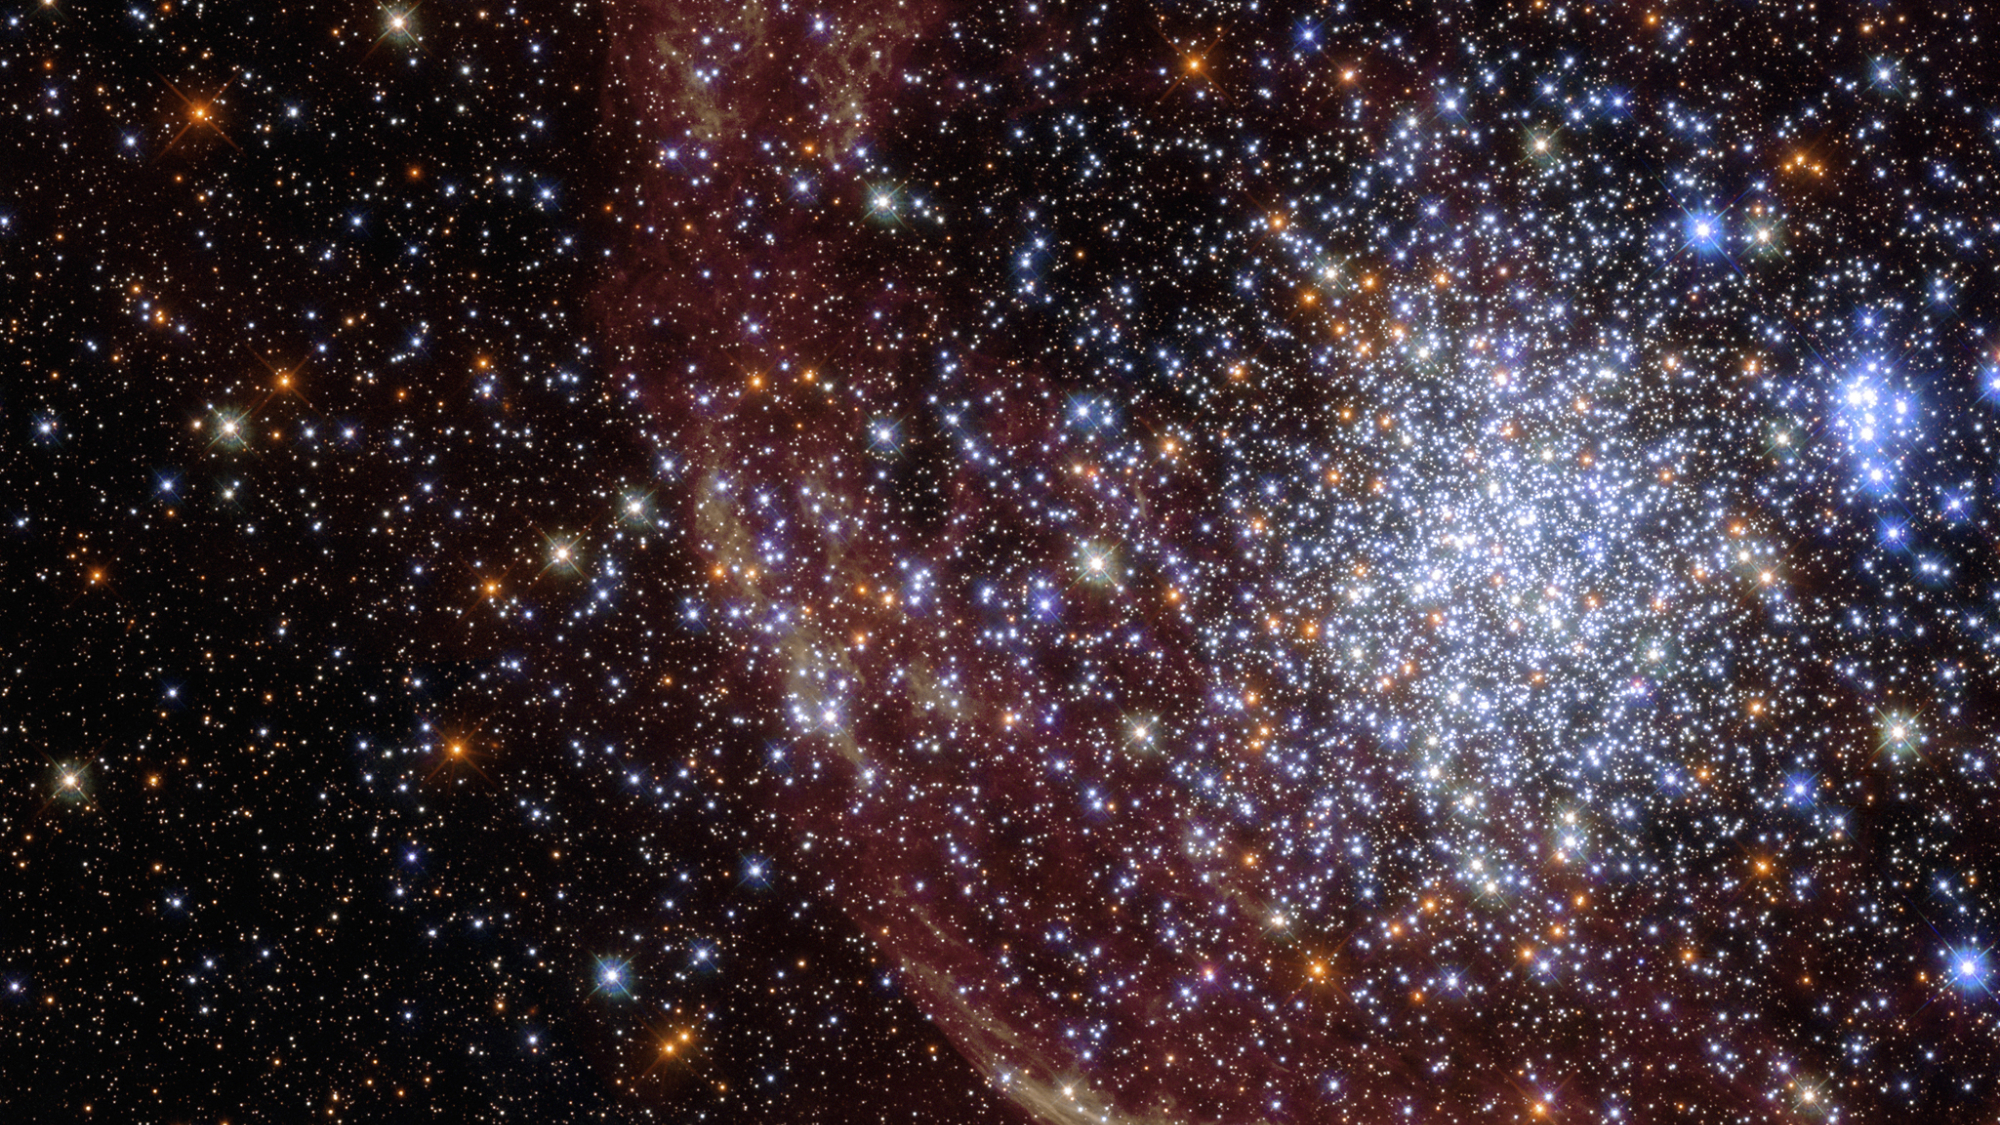 This Hubble image shows the star cluster NGC 1850, located approximately 160,000 light-years away.